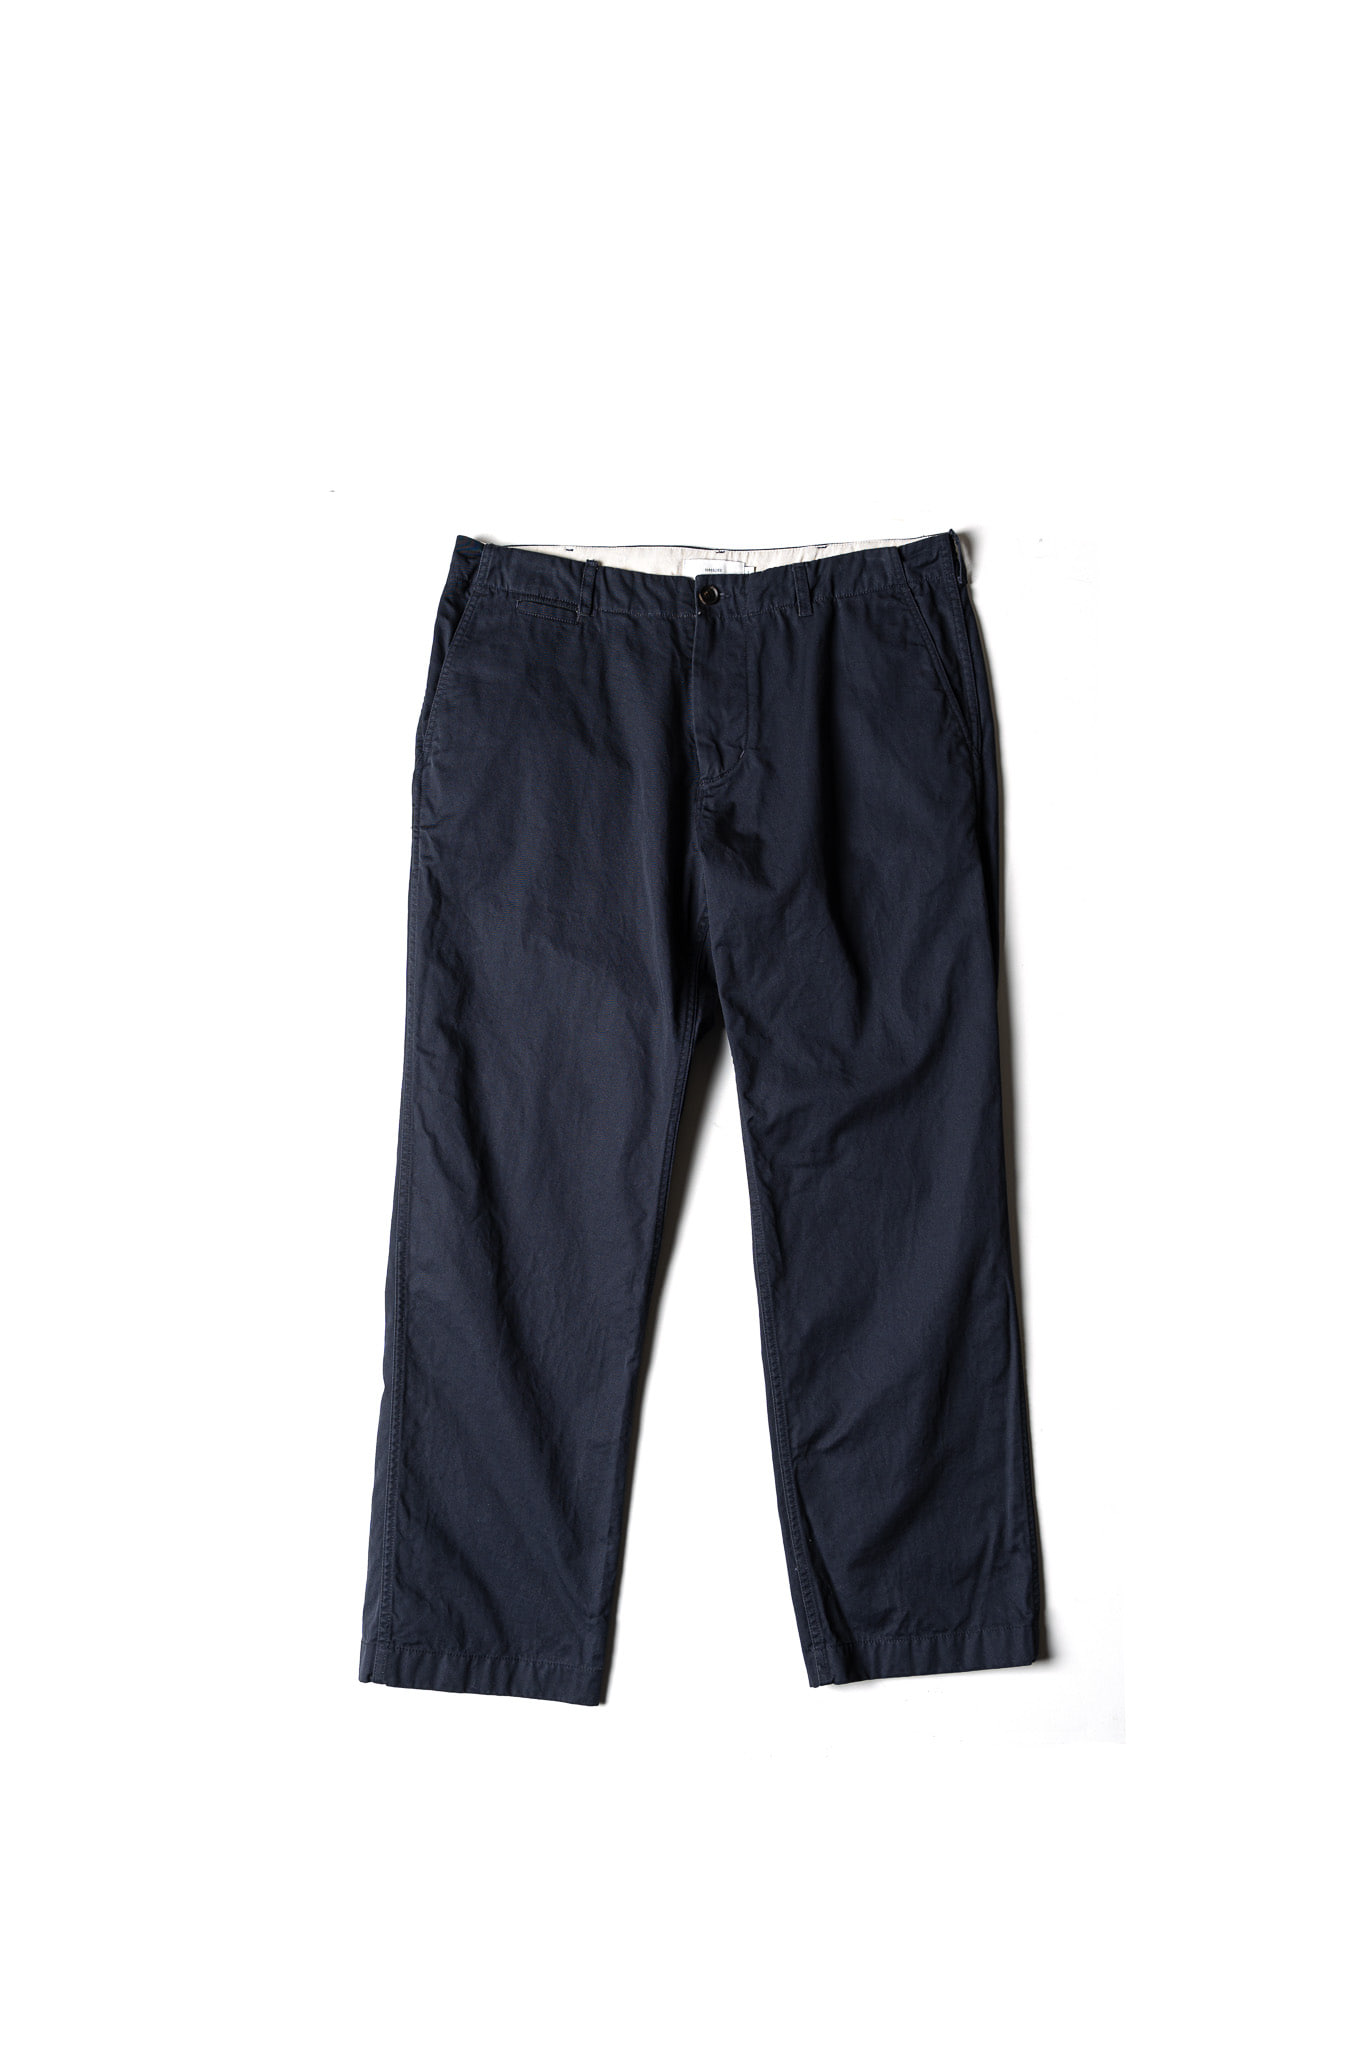 VINTAGE COTTON RELAXED CHINO PANTS - NAVY